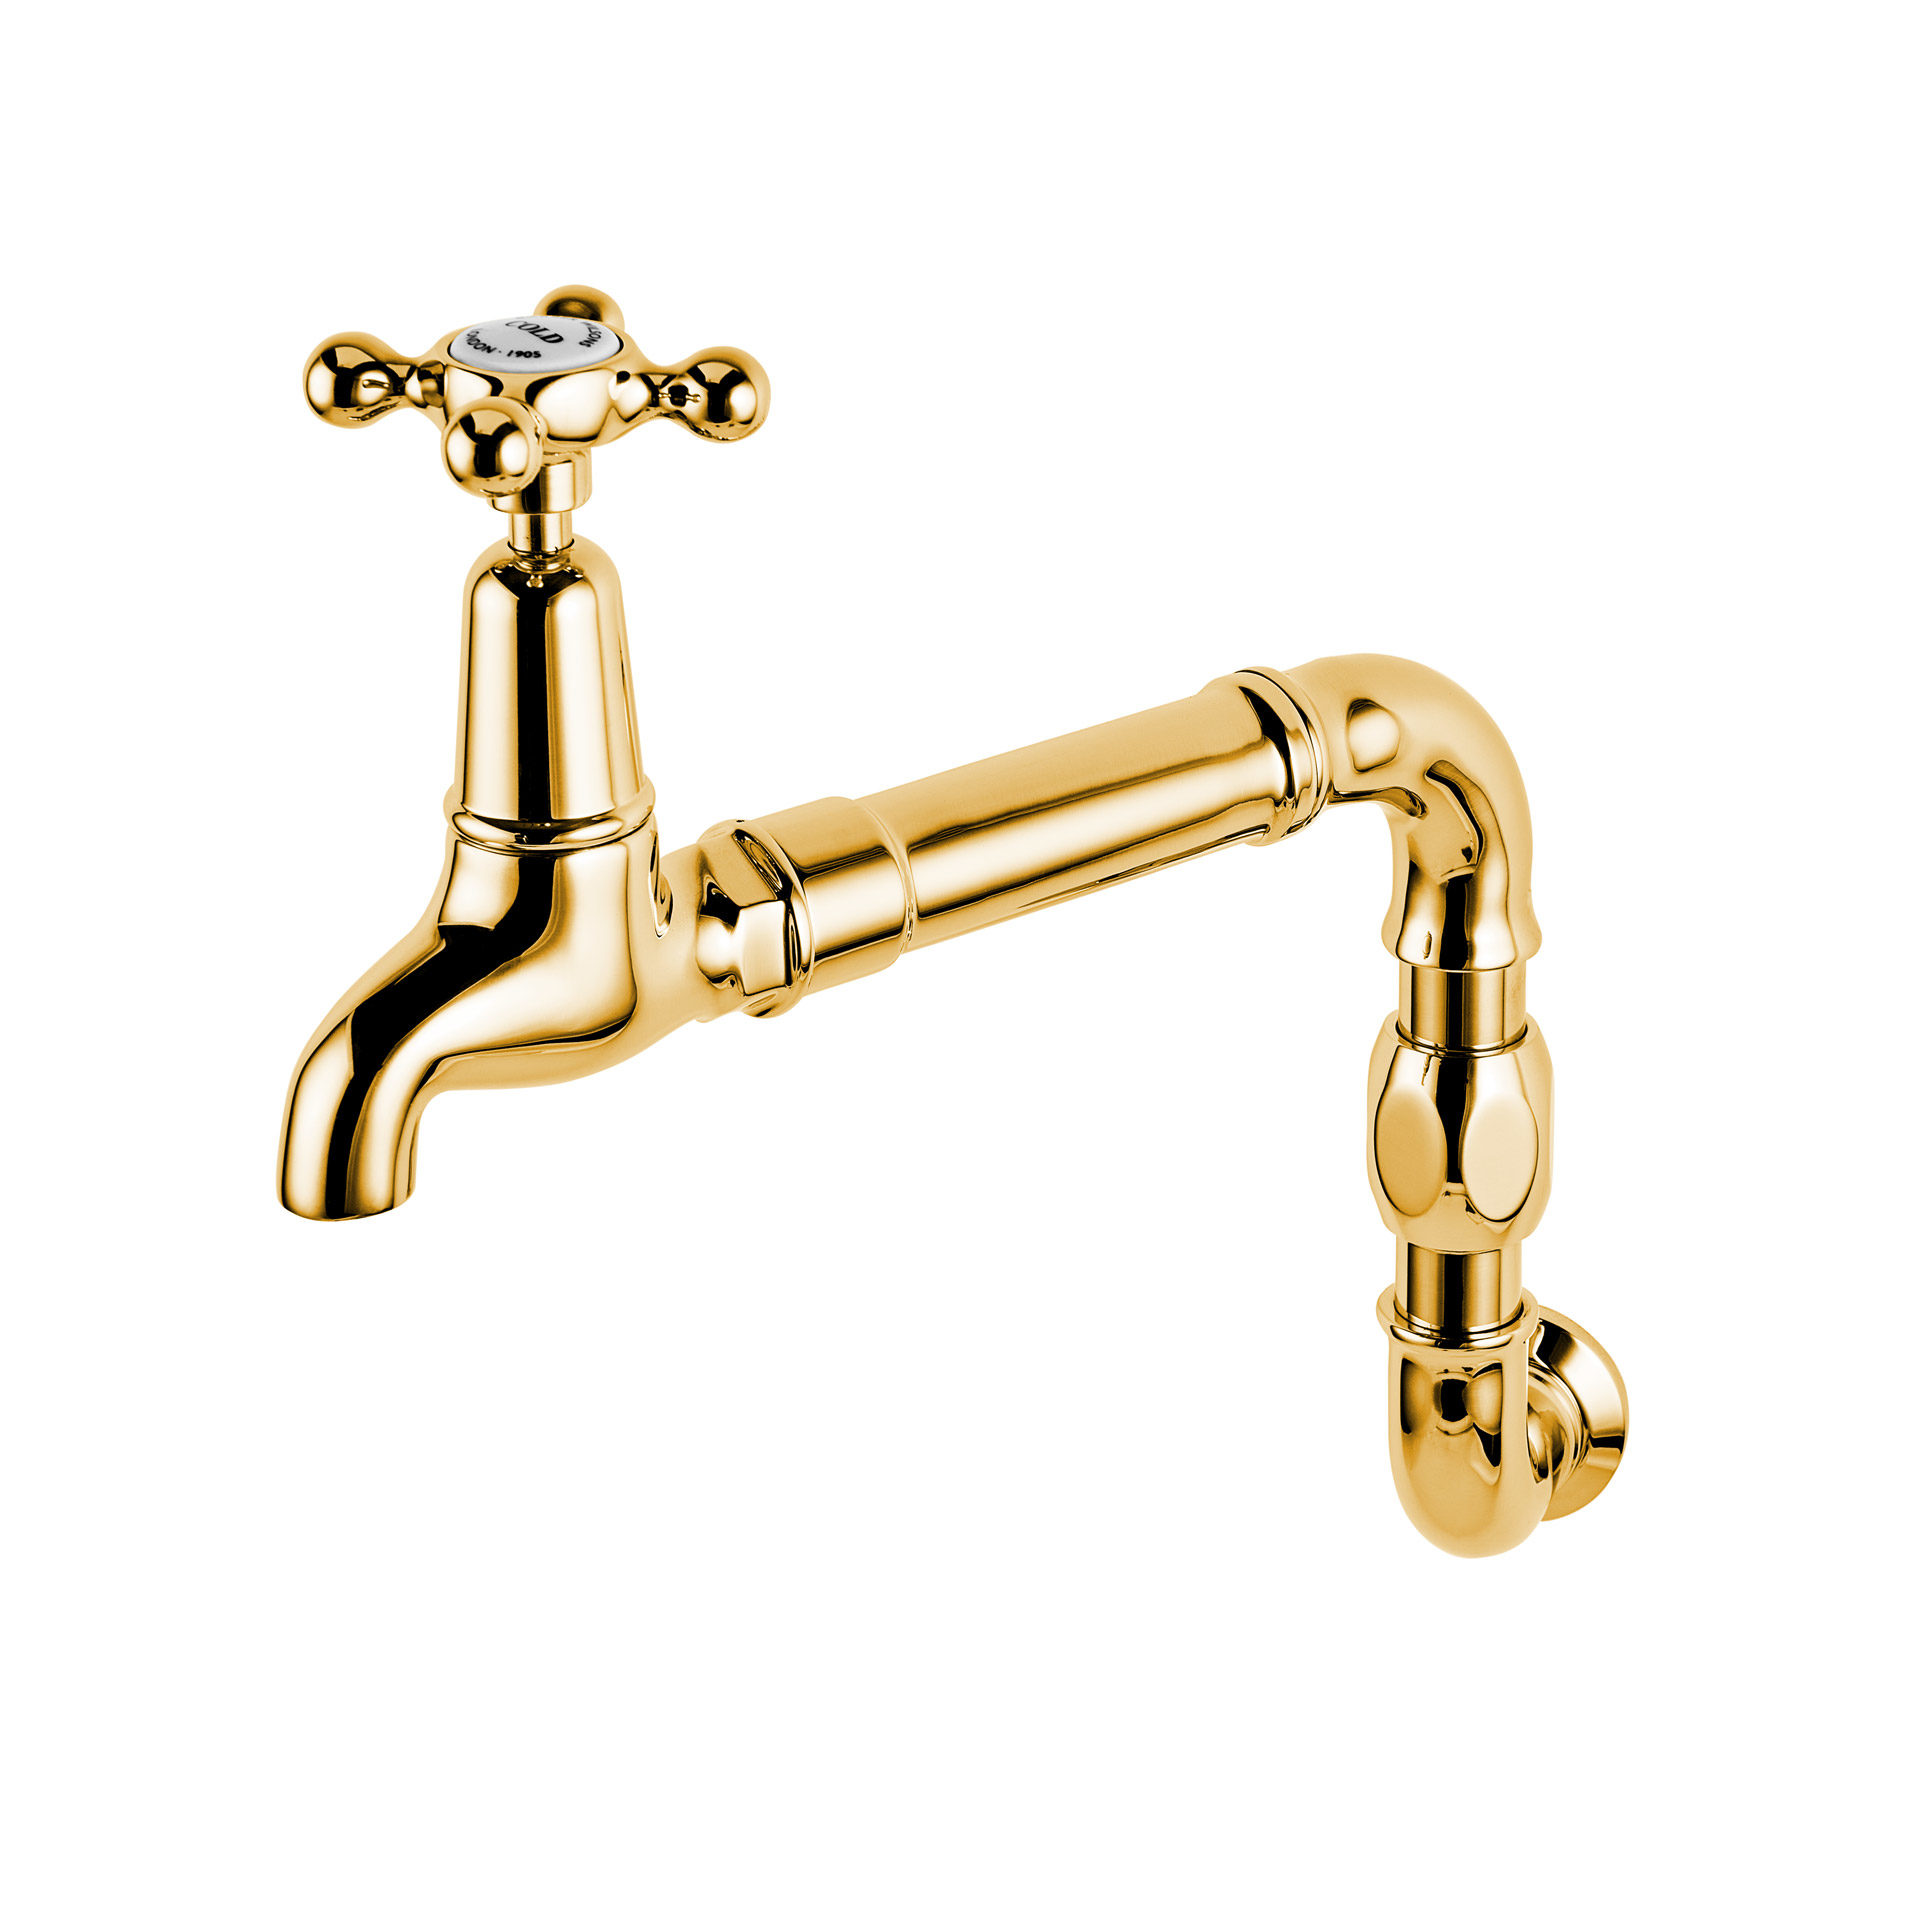 Wall mounted kitchen tap with swinging arm in polished bronze